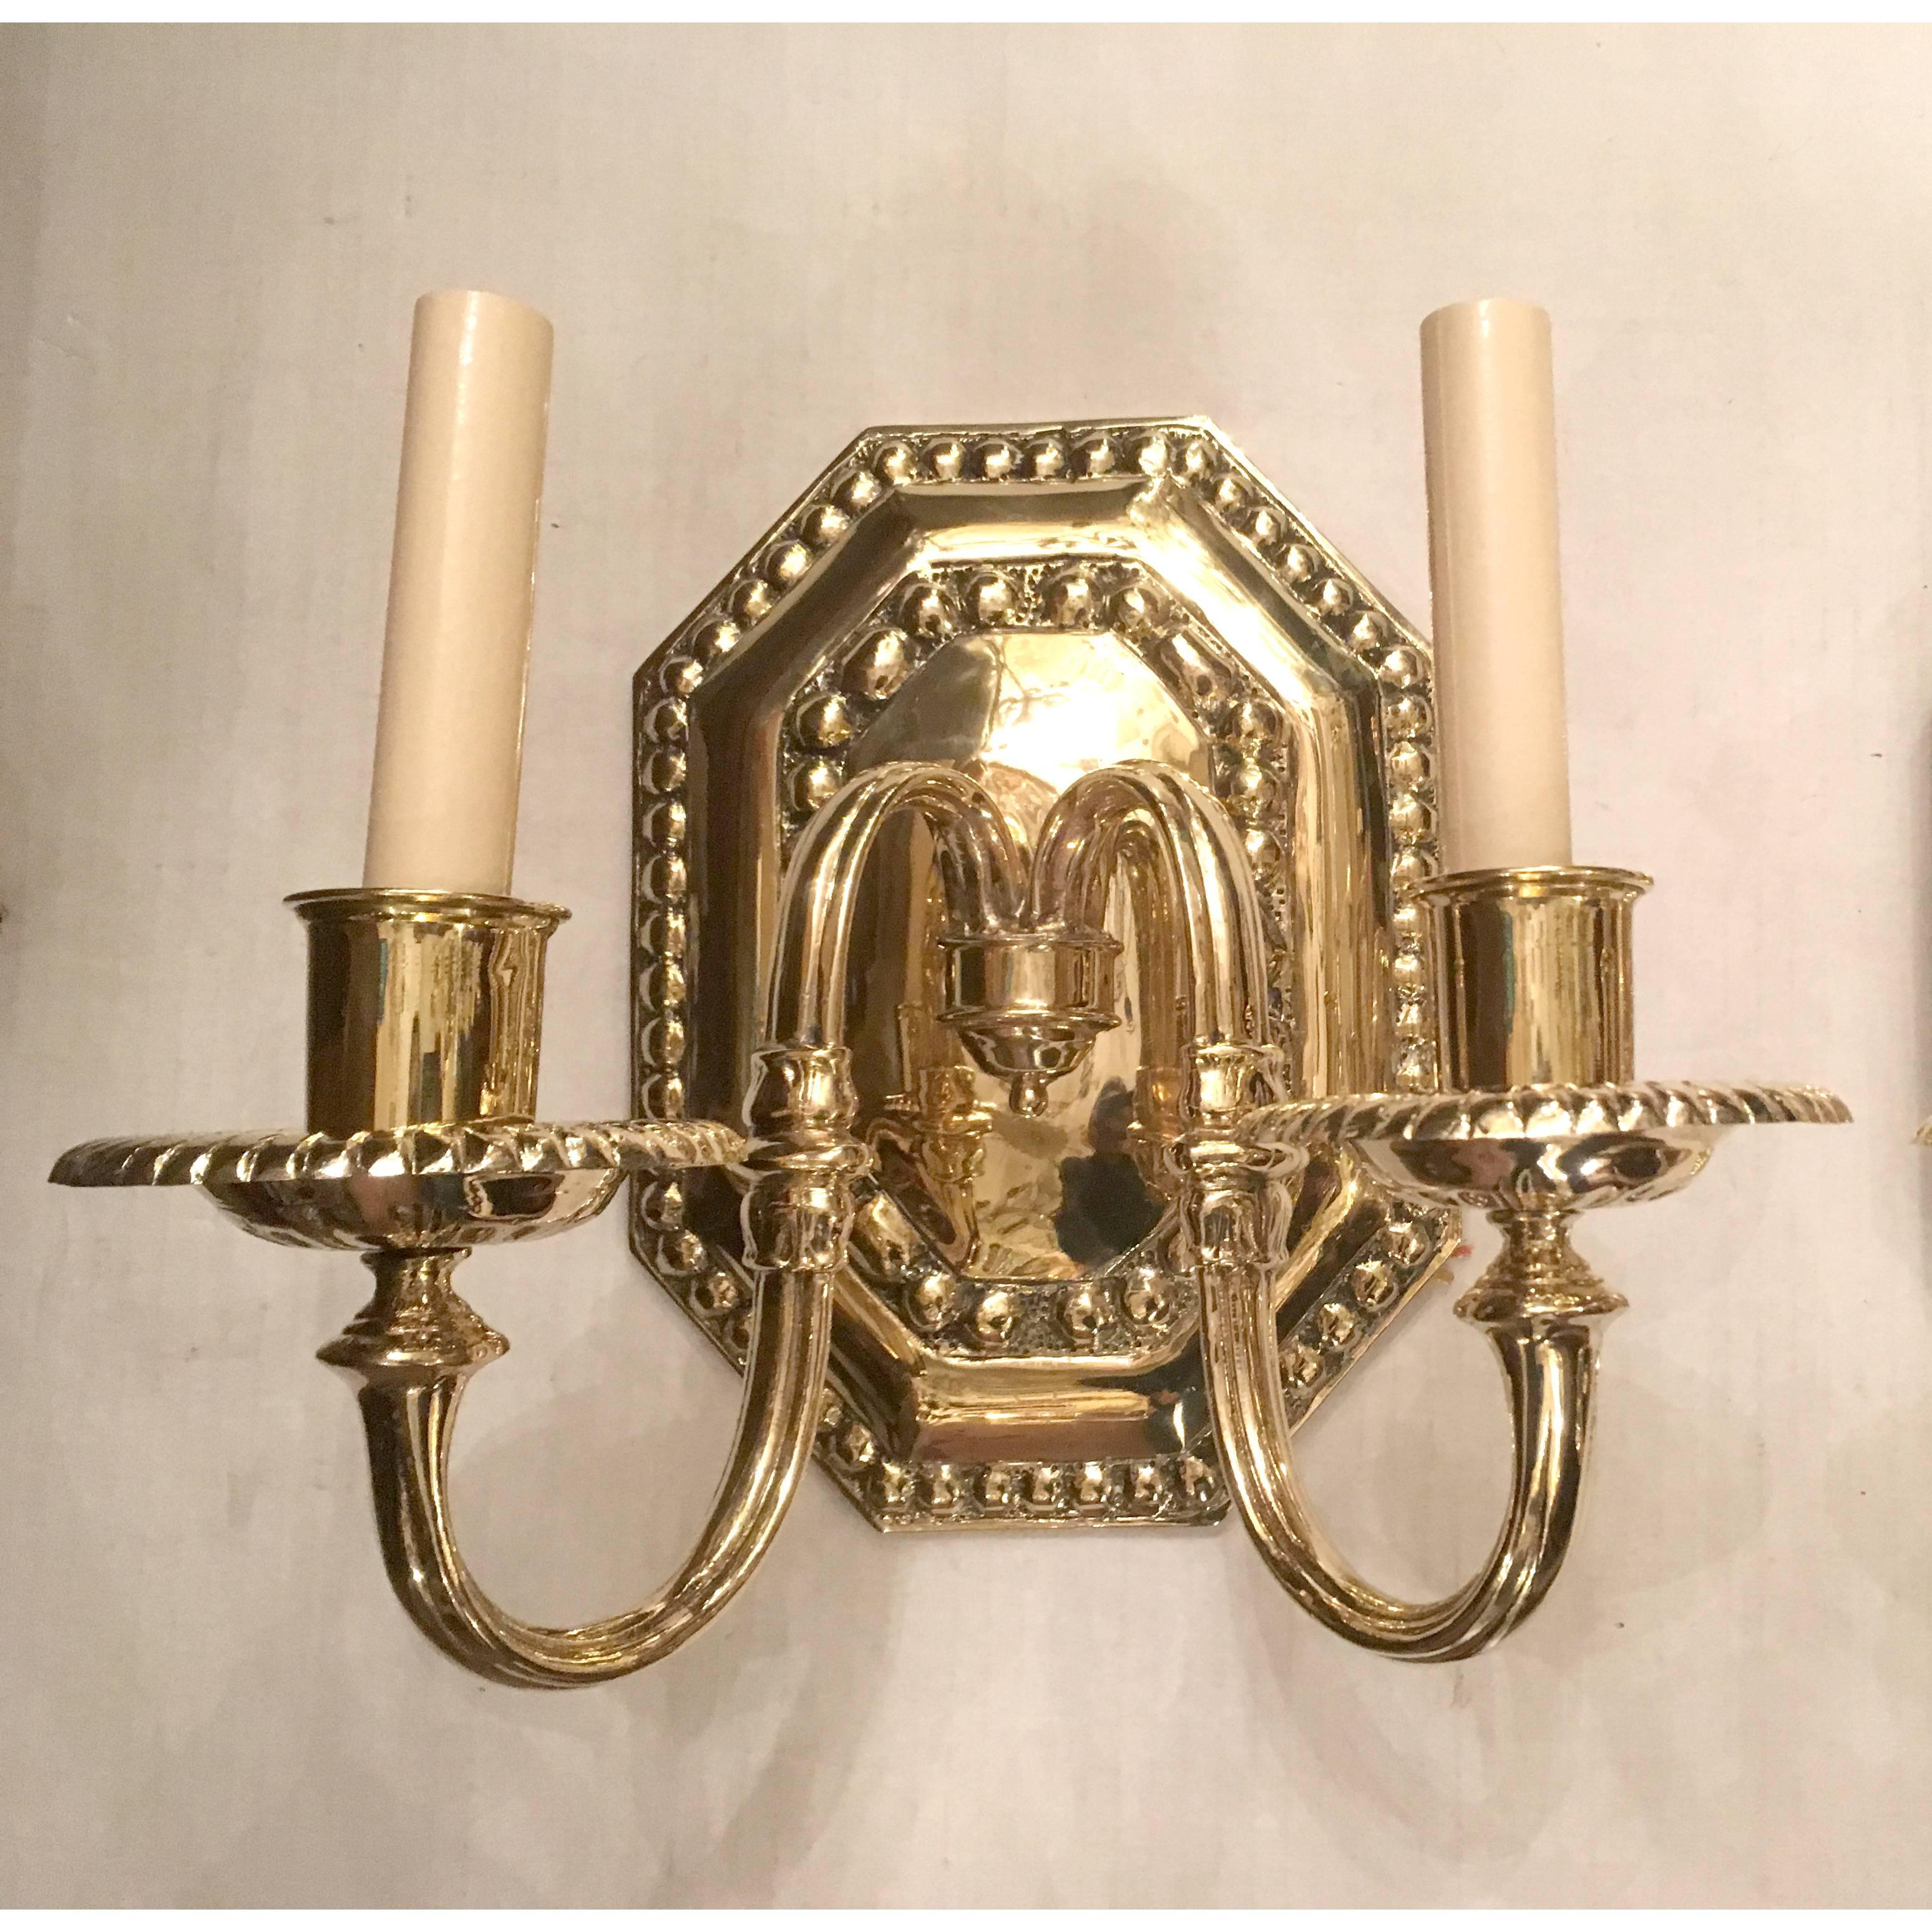 Set of 12 neoclassic bronze sconces, octagonal backplates, polished and lacquered finish. Italian, 1940s.